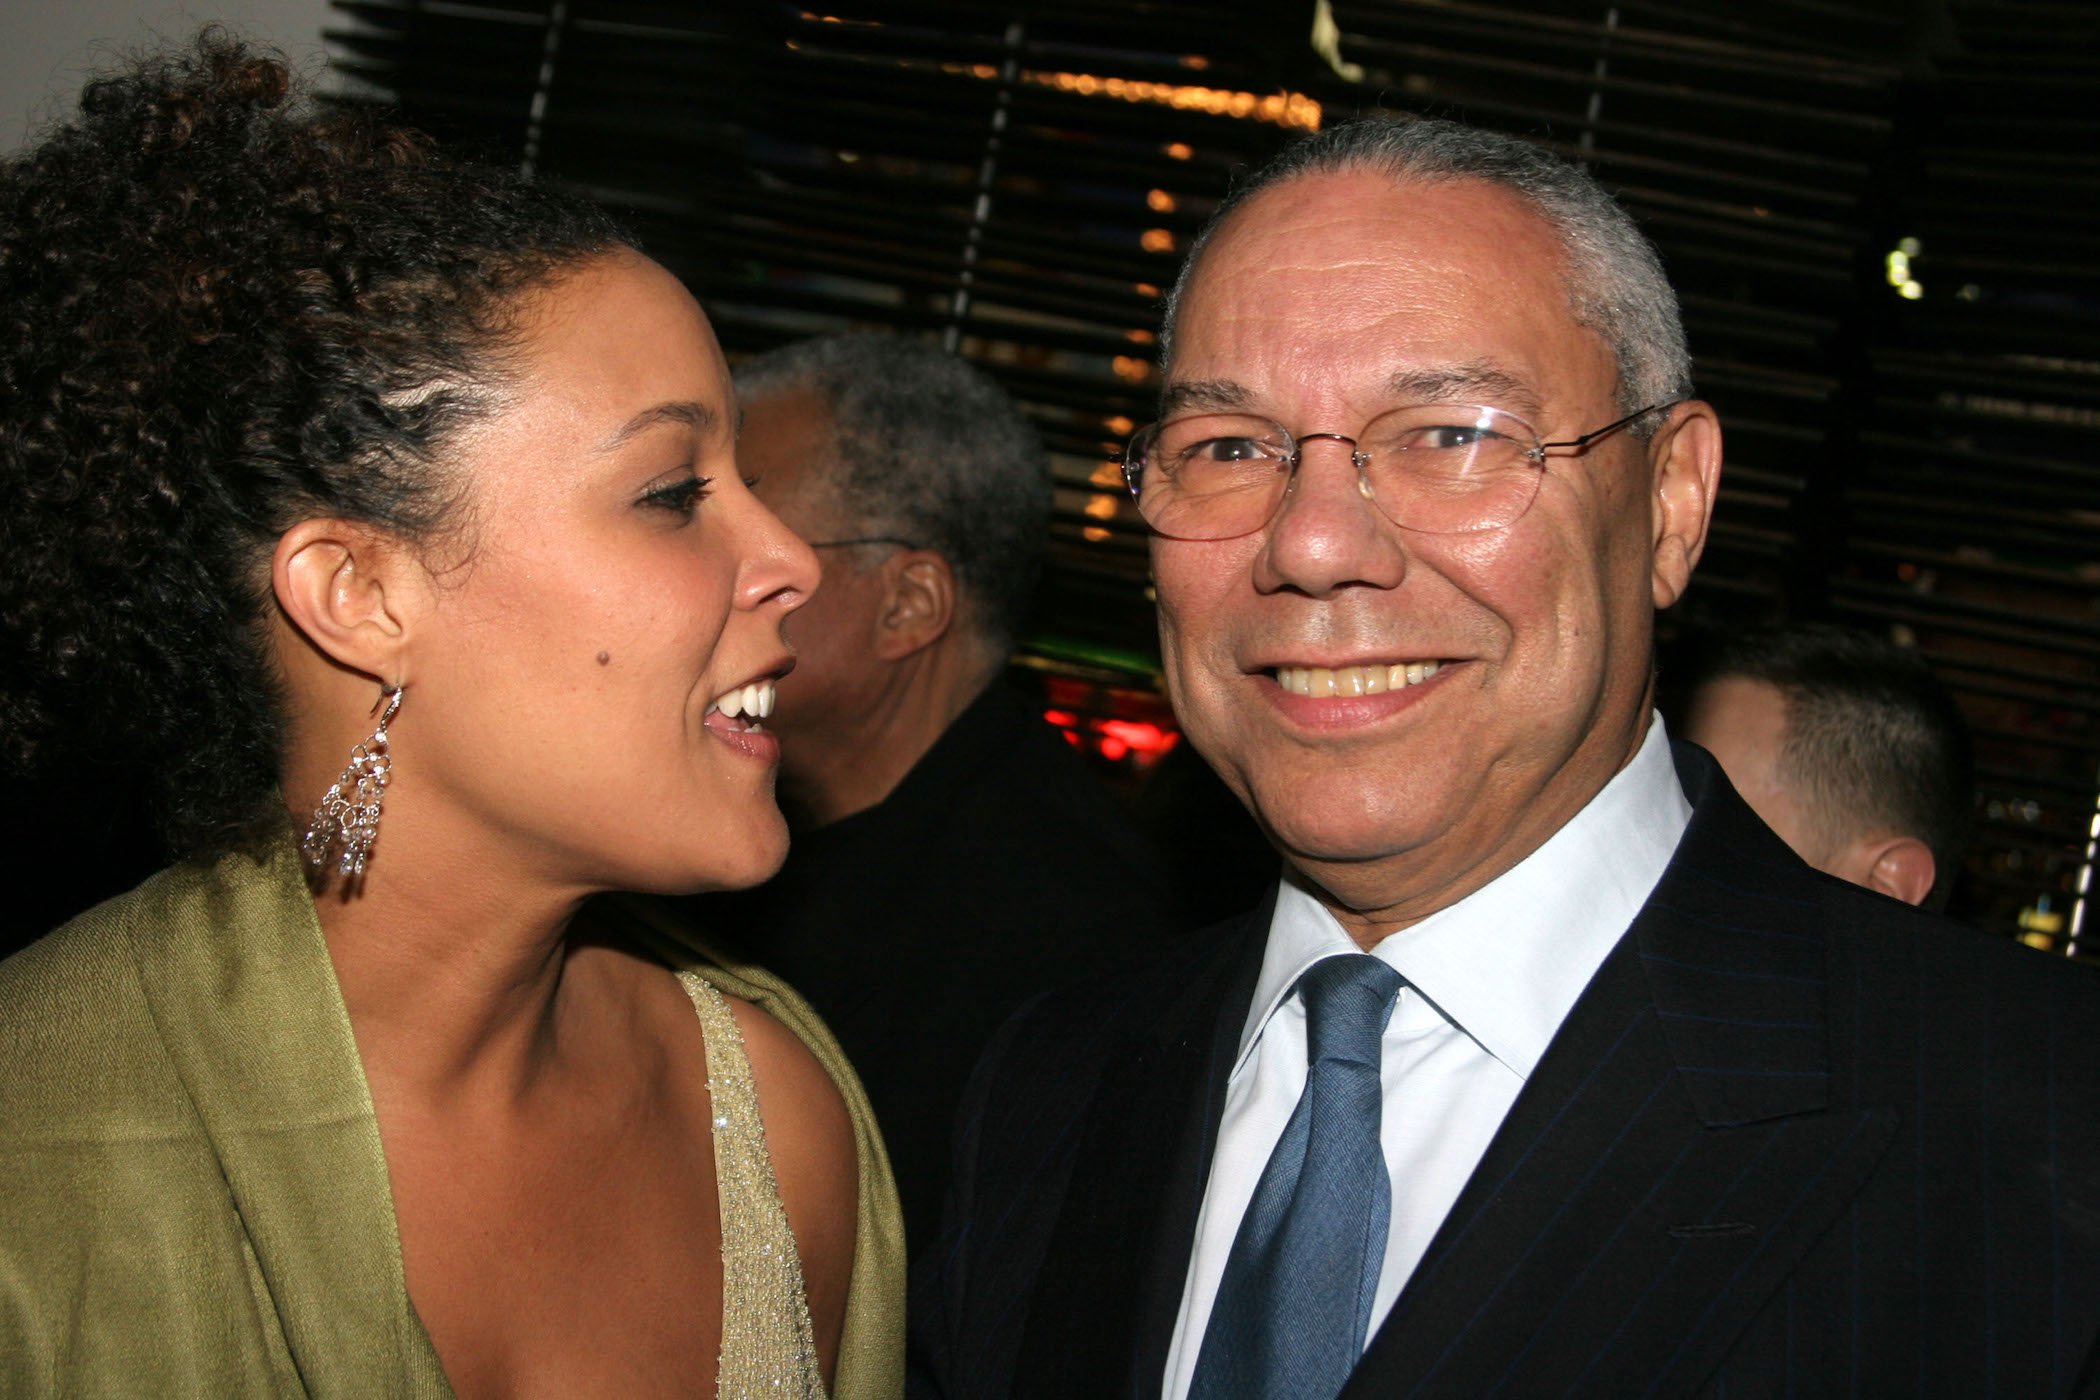 Linda Powell and Colin Powell at an event together. Colin Powell's children survive him. Linda Powell is an actor and has starred in shows like 'Chicago Fire.'